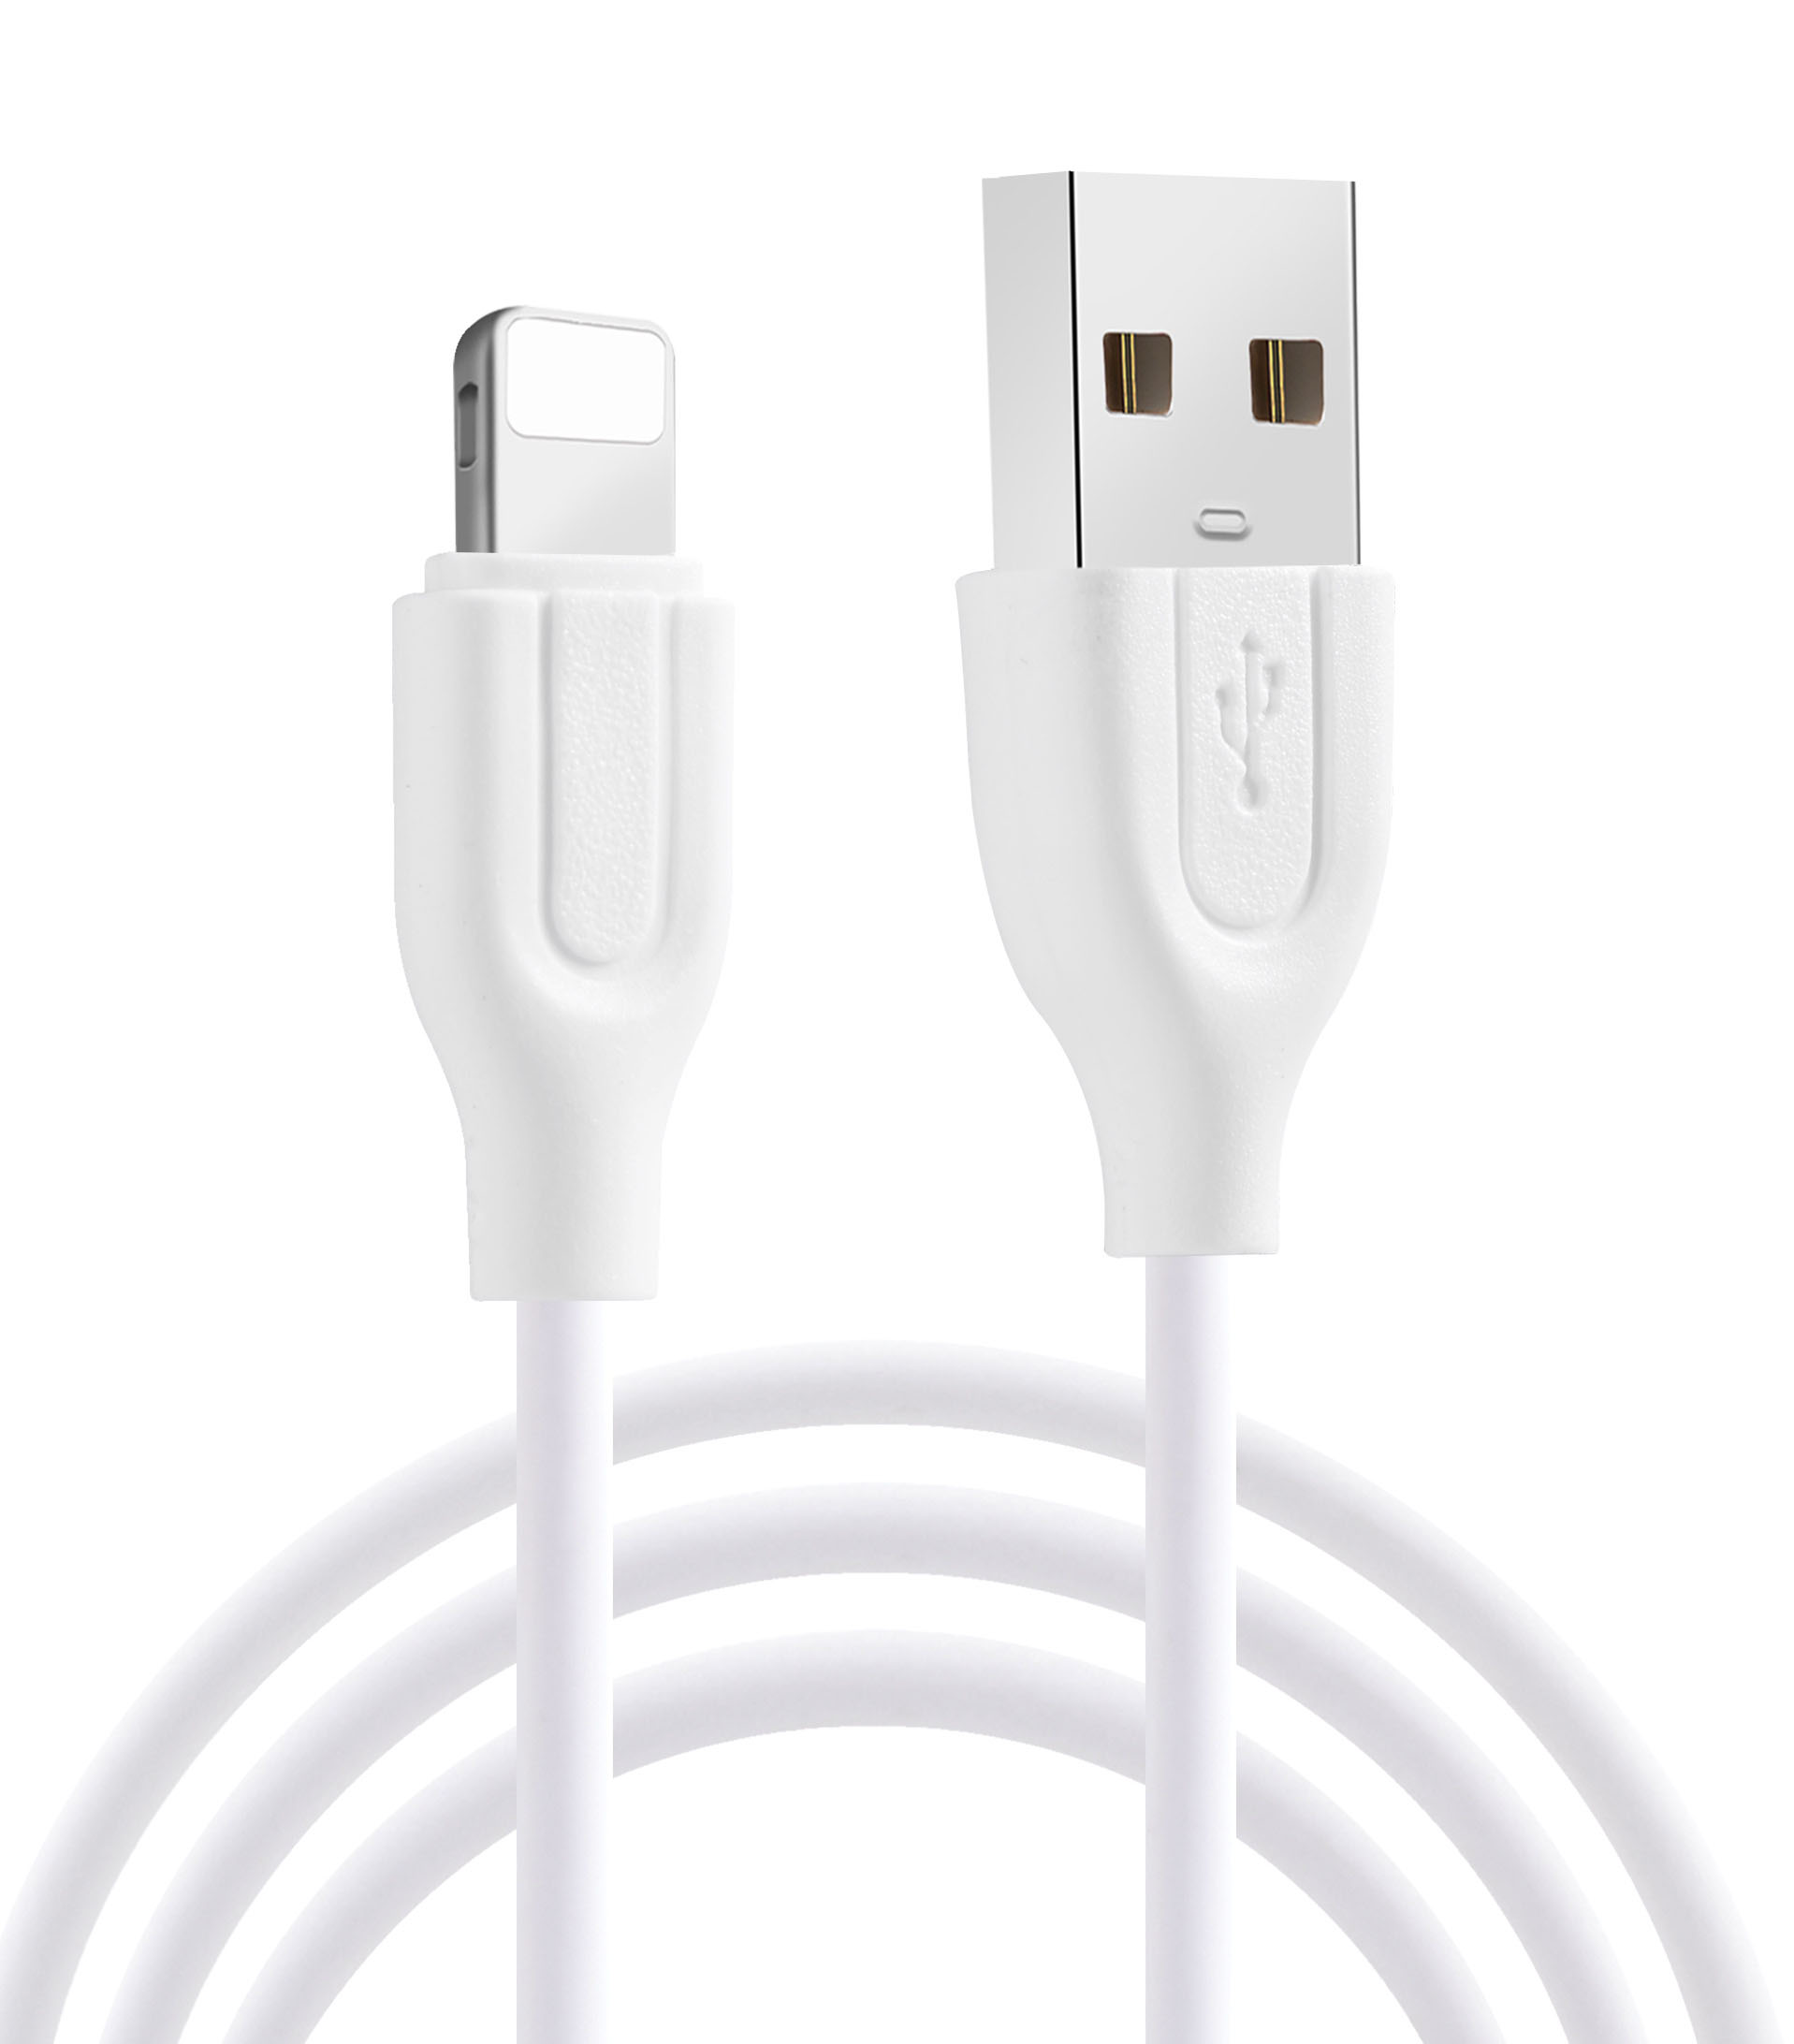 HF-QH03: iPhone Lightning Data Fast Charing Sync cable to USB 1m/3ft for iPhone/iPad